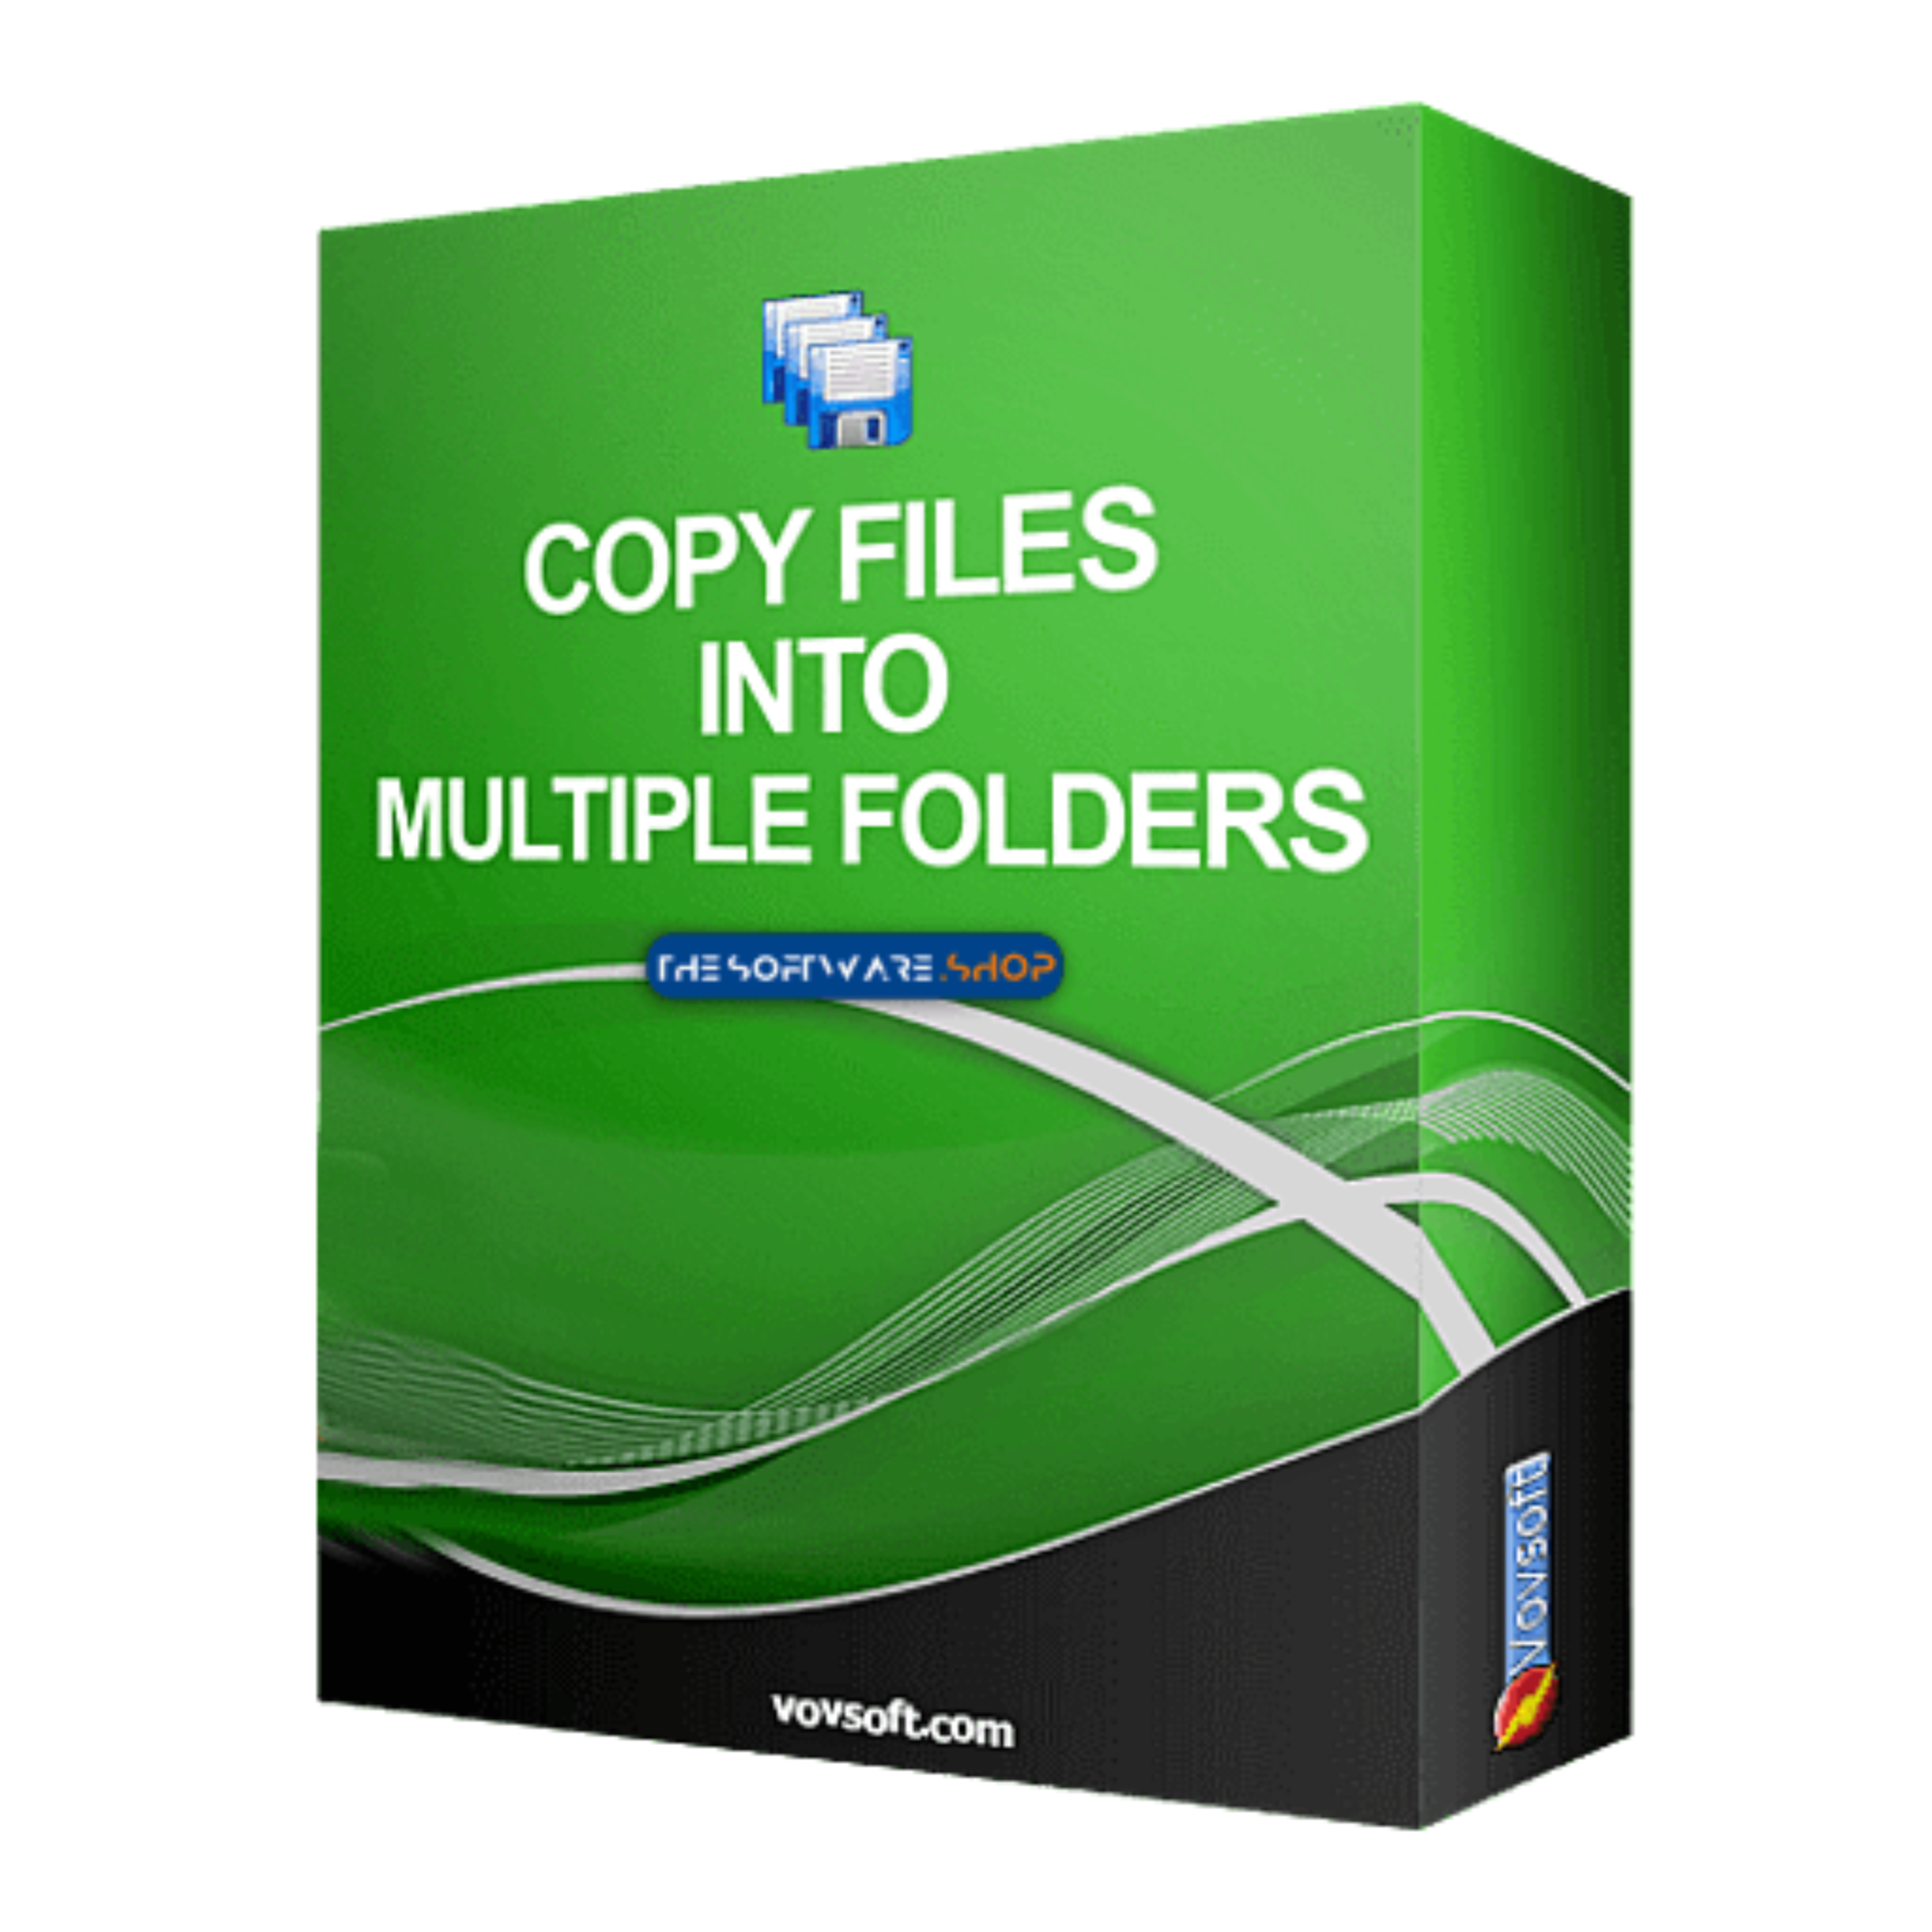 copy-files-into-multiple-folders-review-free-full-version